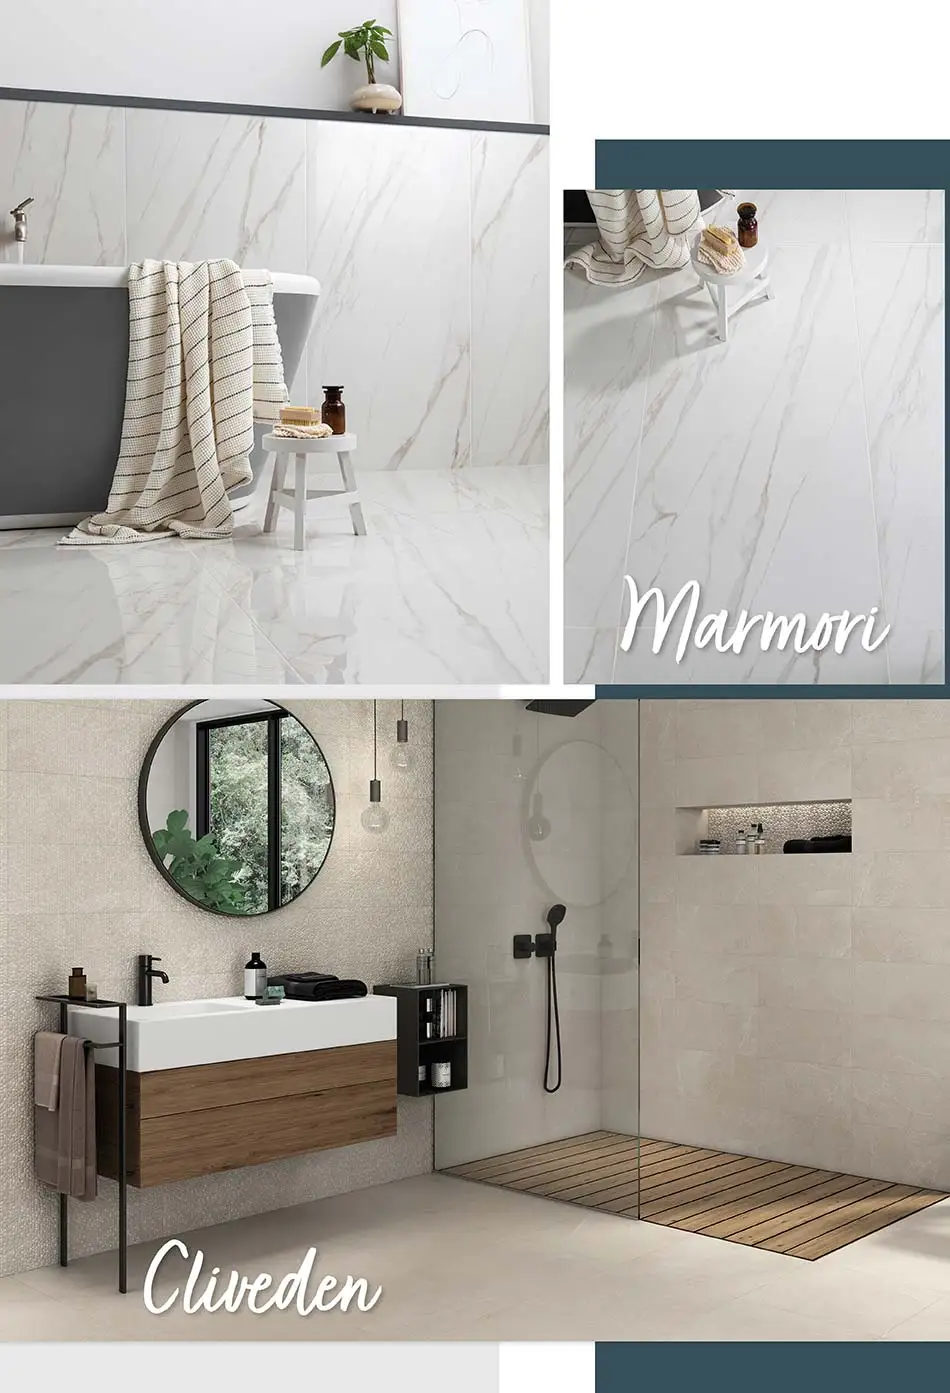 Marmori & Cliveden wall and floor tile collection